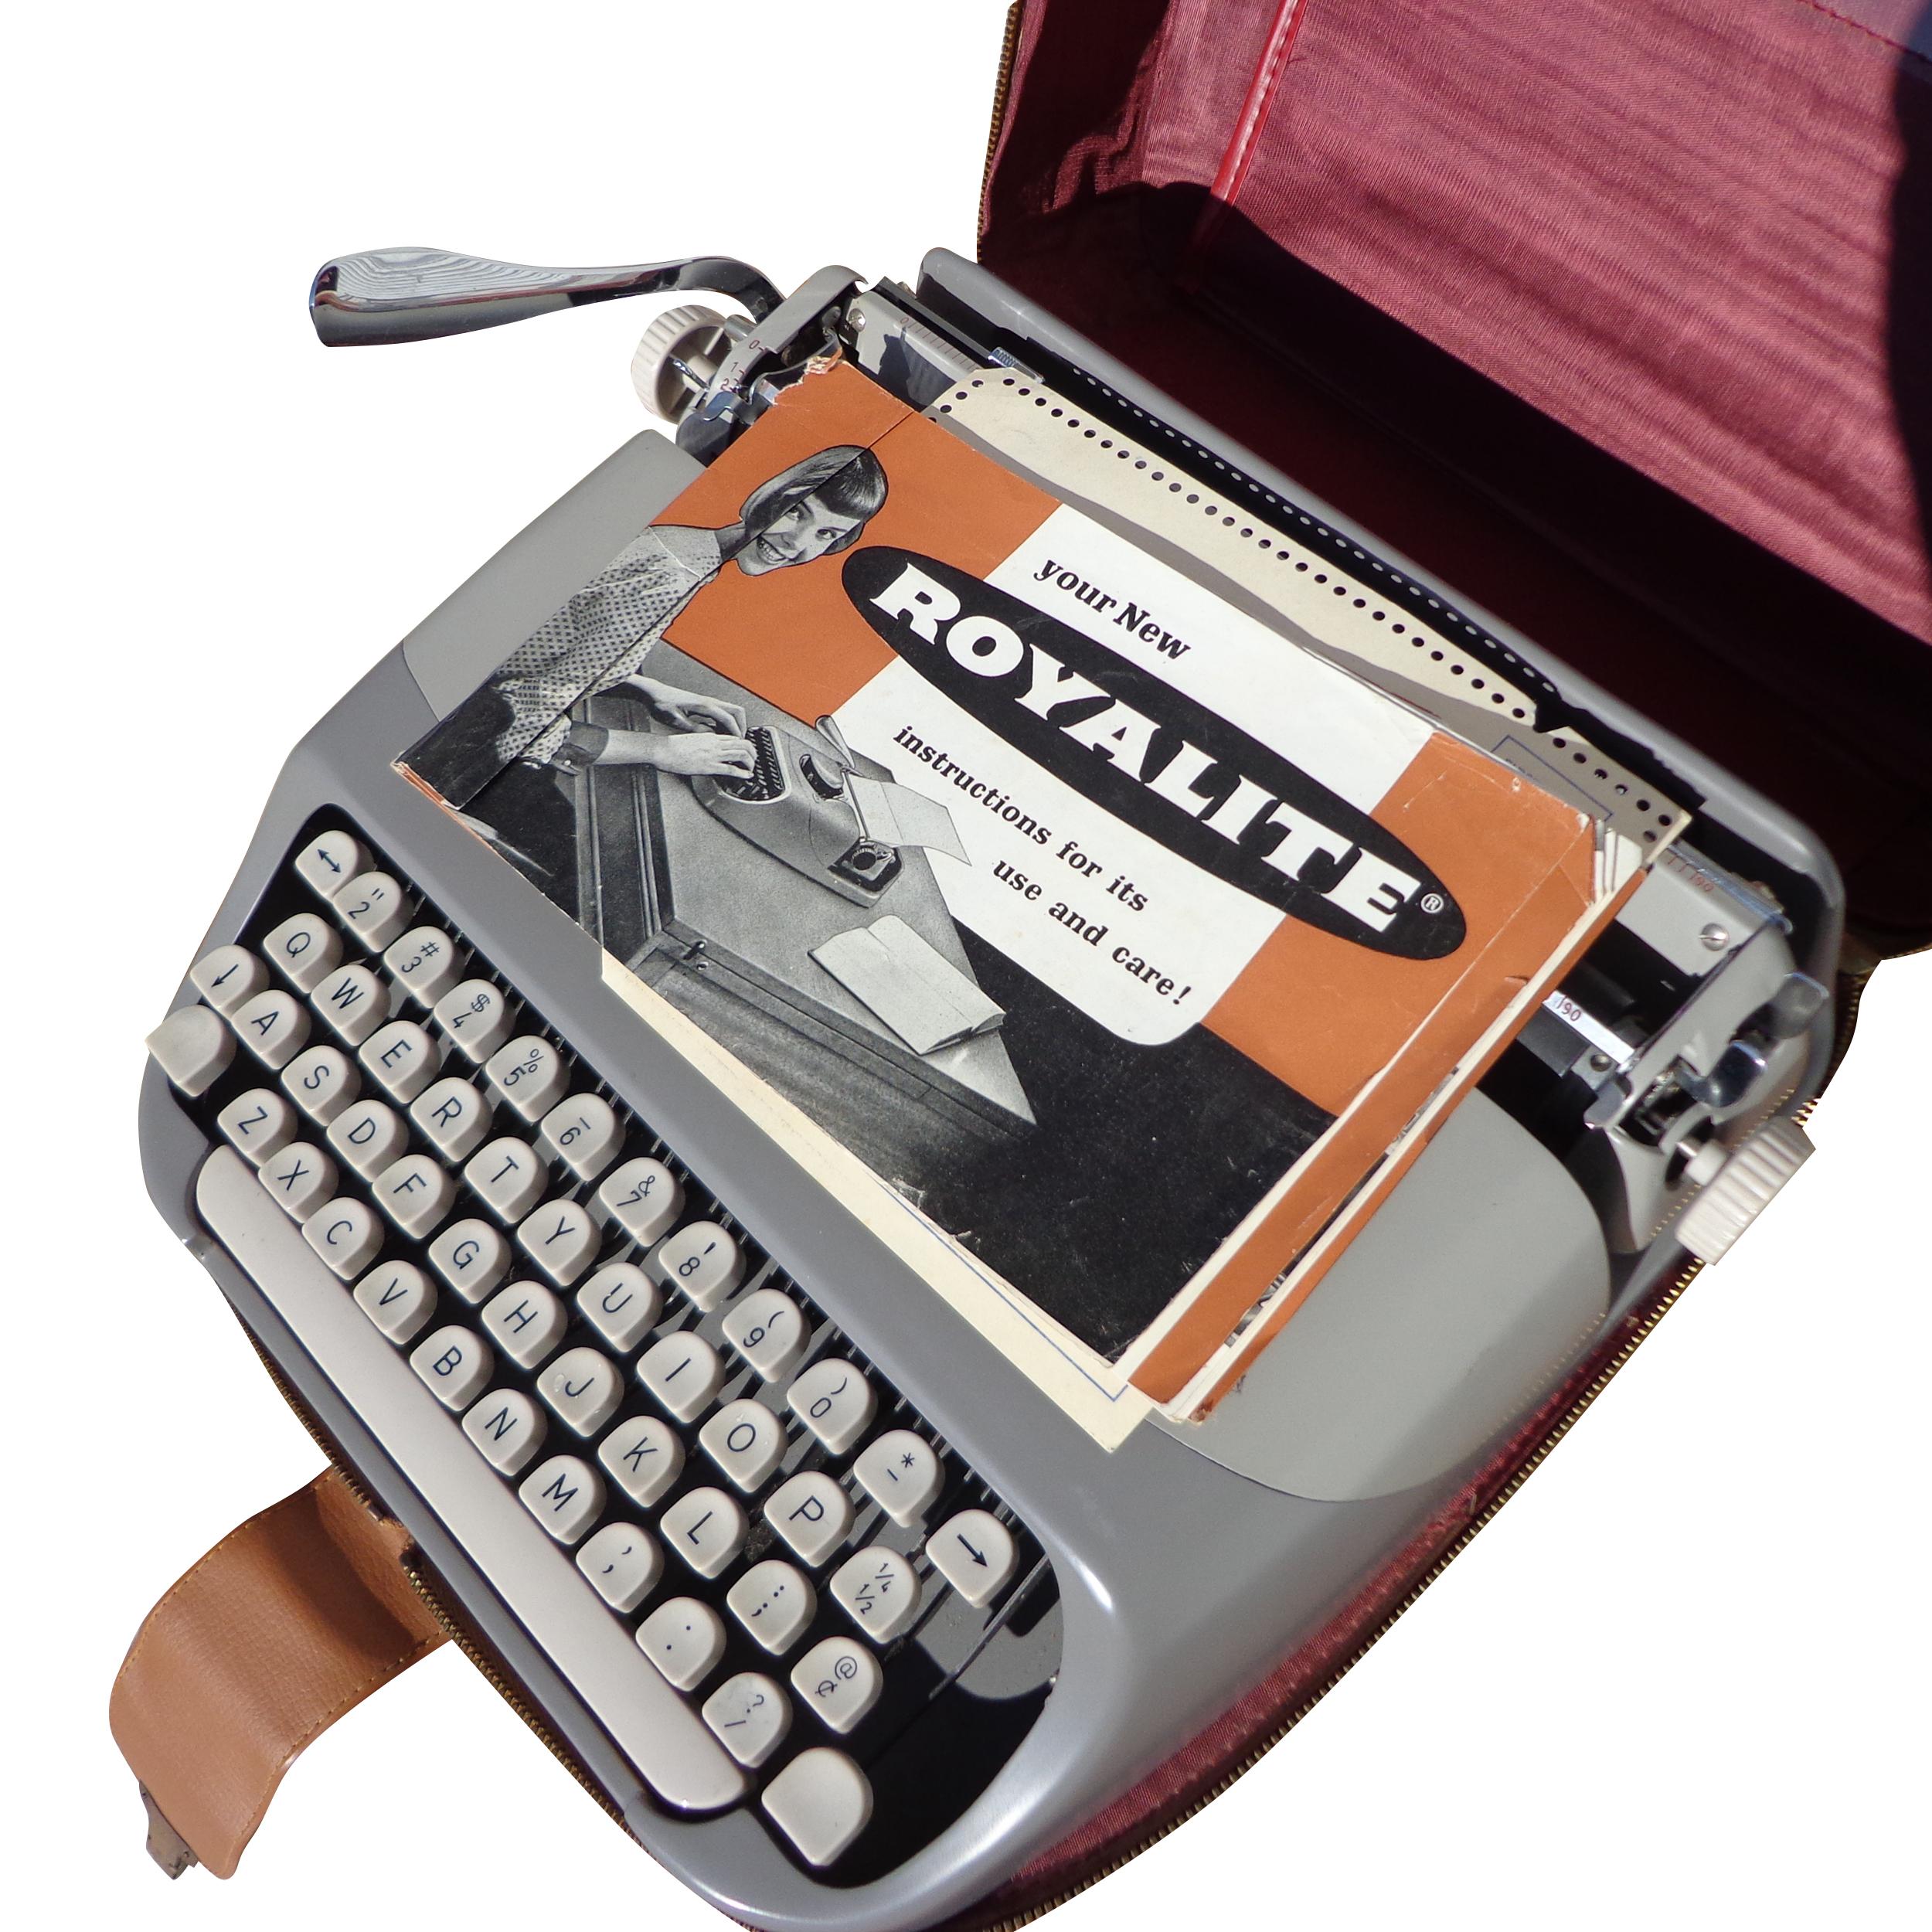 1960s Royal Holland Royalite Portable Typewriter and Case

Includes the original carrying case and owner manual. 

New typewriter ribbon suggested.